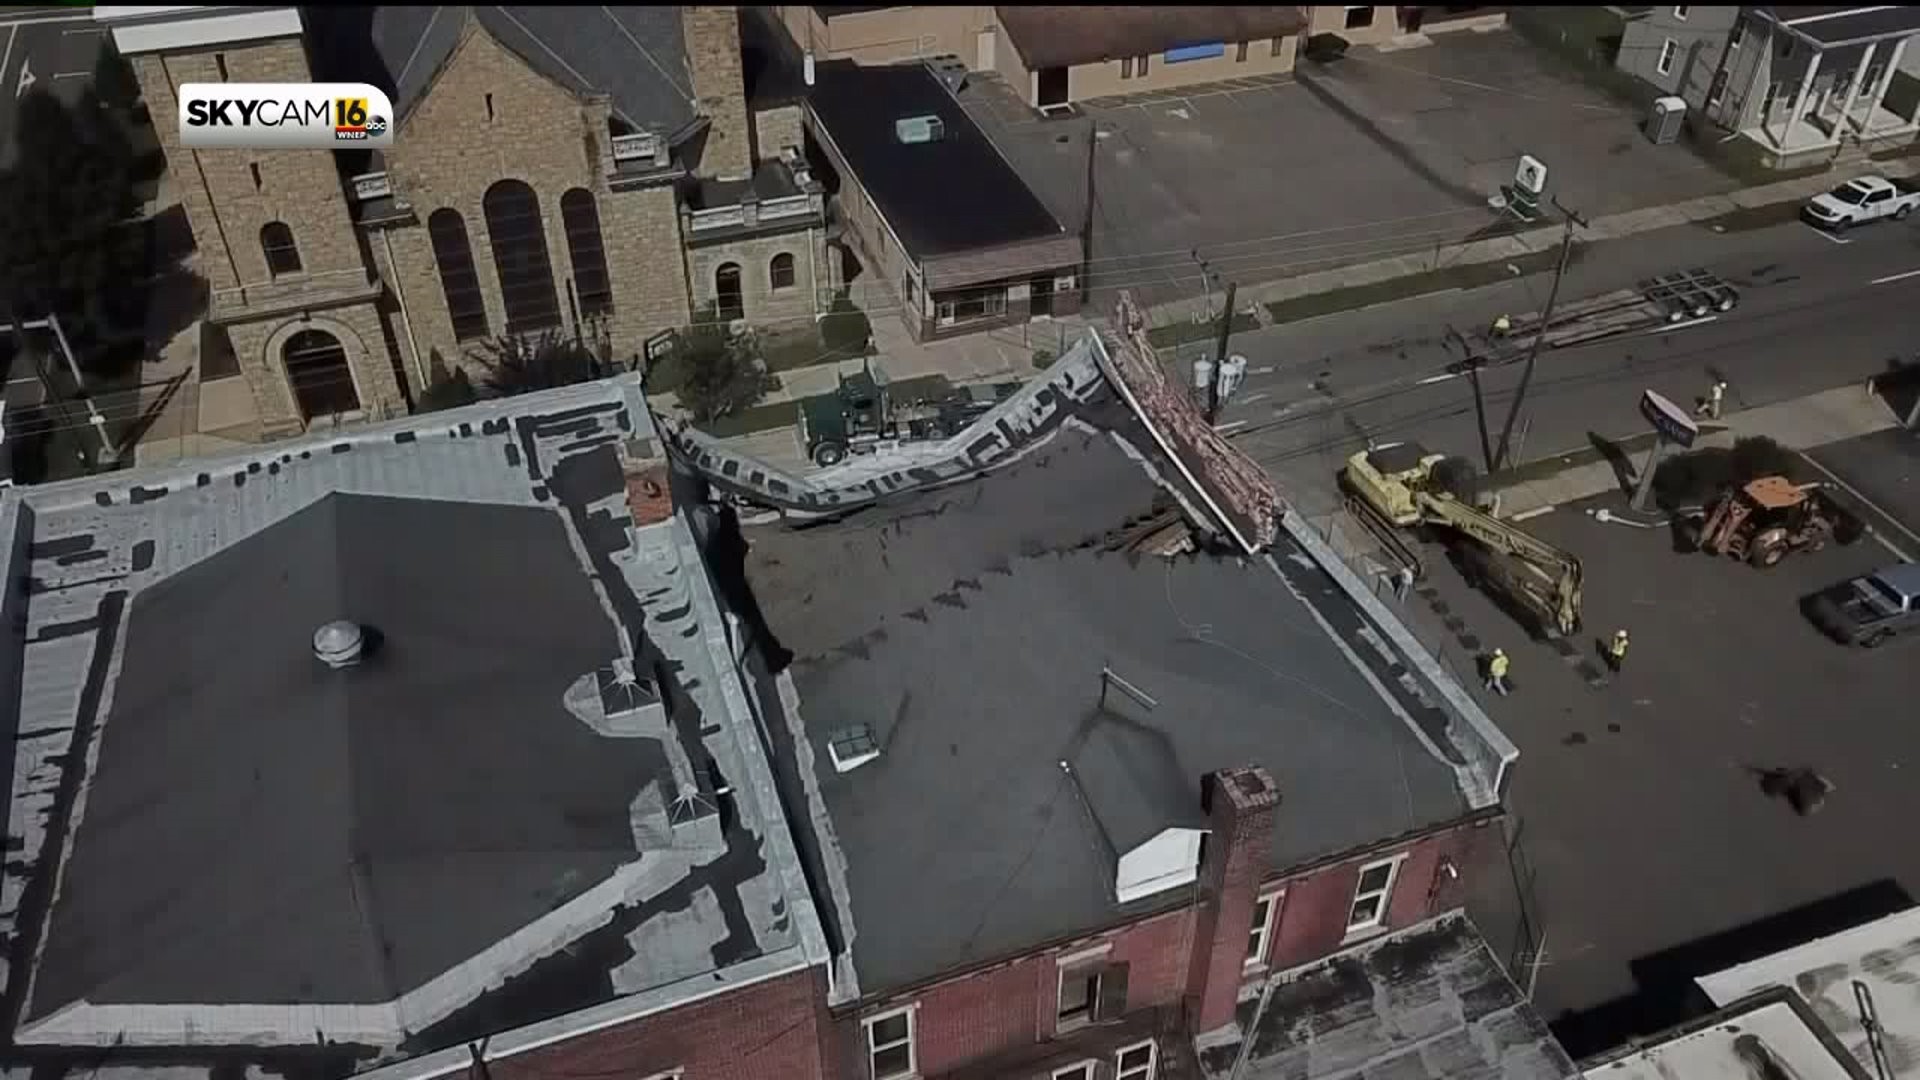 Demolition Starts on Collapsed Building in Berwick